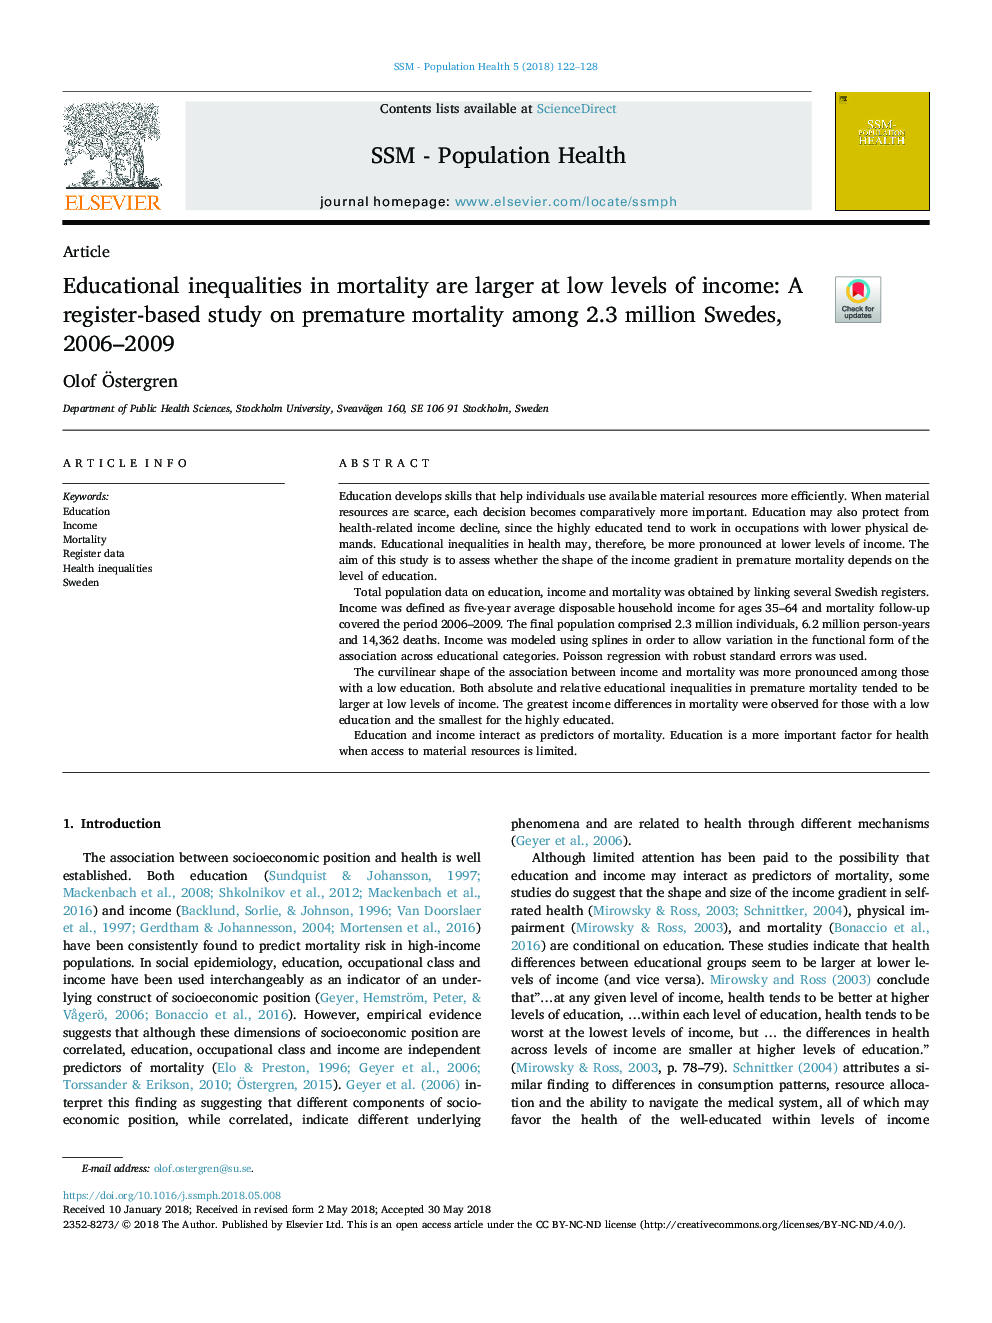 Educational inequalities in mortality are larger at low levels of income: A register-based study on premature mortality among 2.3 million Swedes, 2006-2009